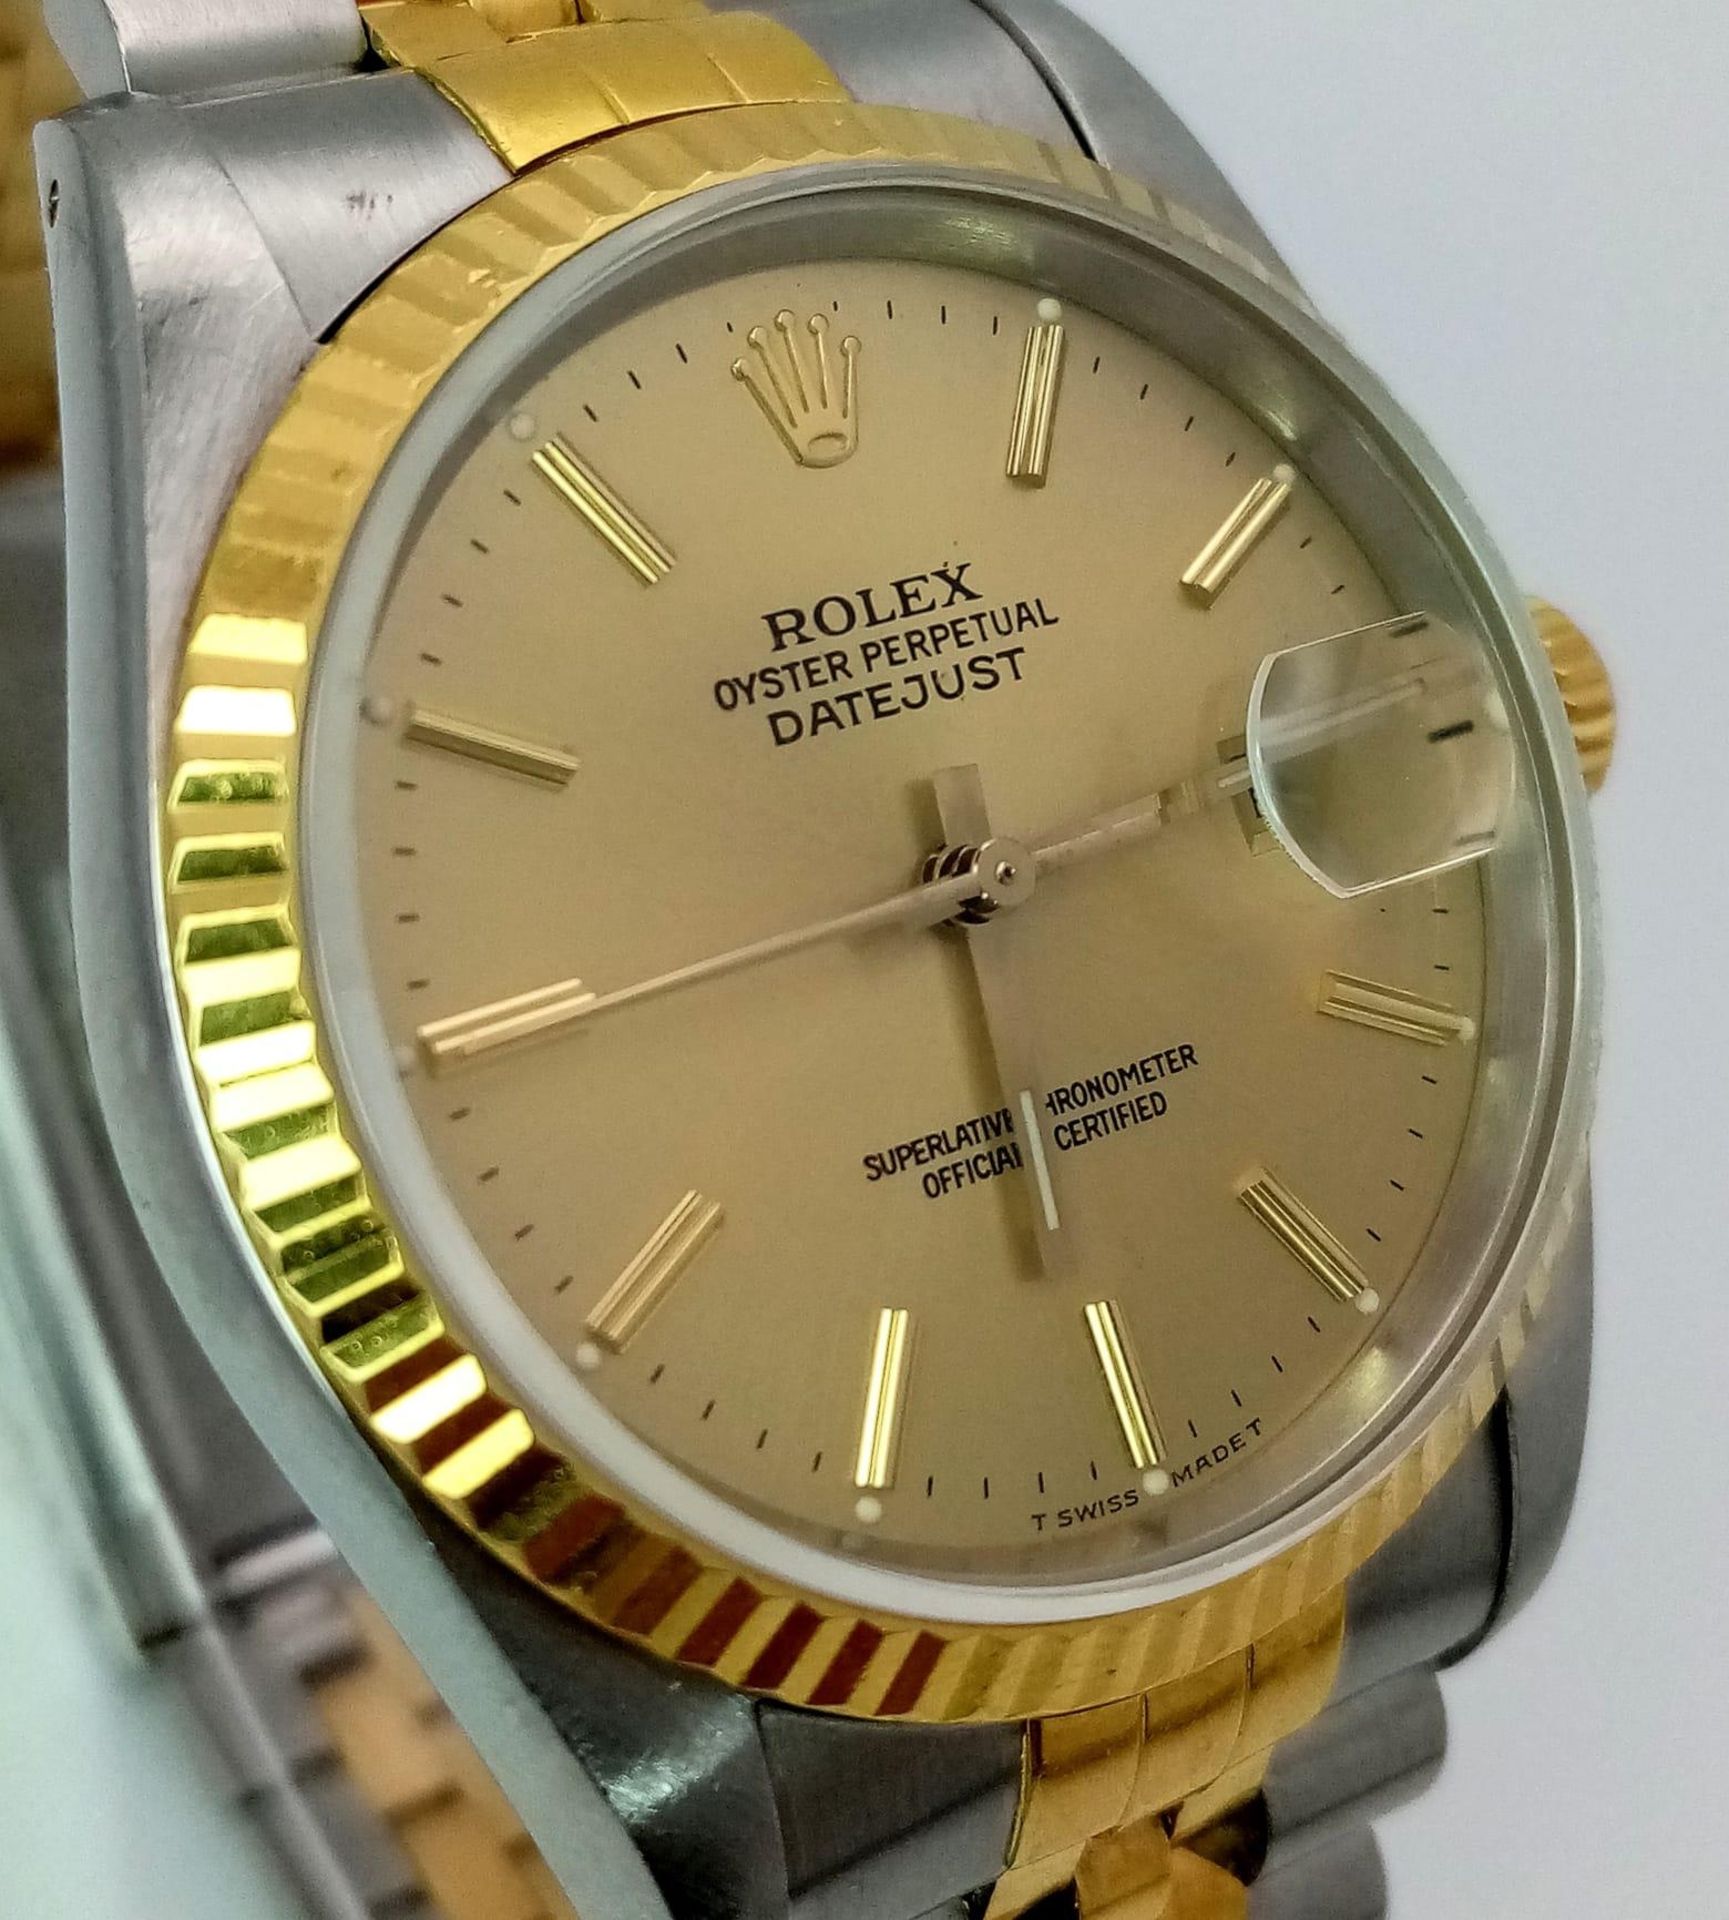 THE CLASSIC ROLEX OYSTER PERPETUAL DATEJUST IN BI-METAL WITH GOLDTONE DIAL . 36mm - Image 4 of 7